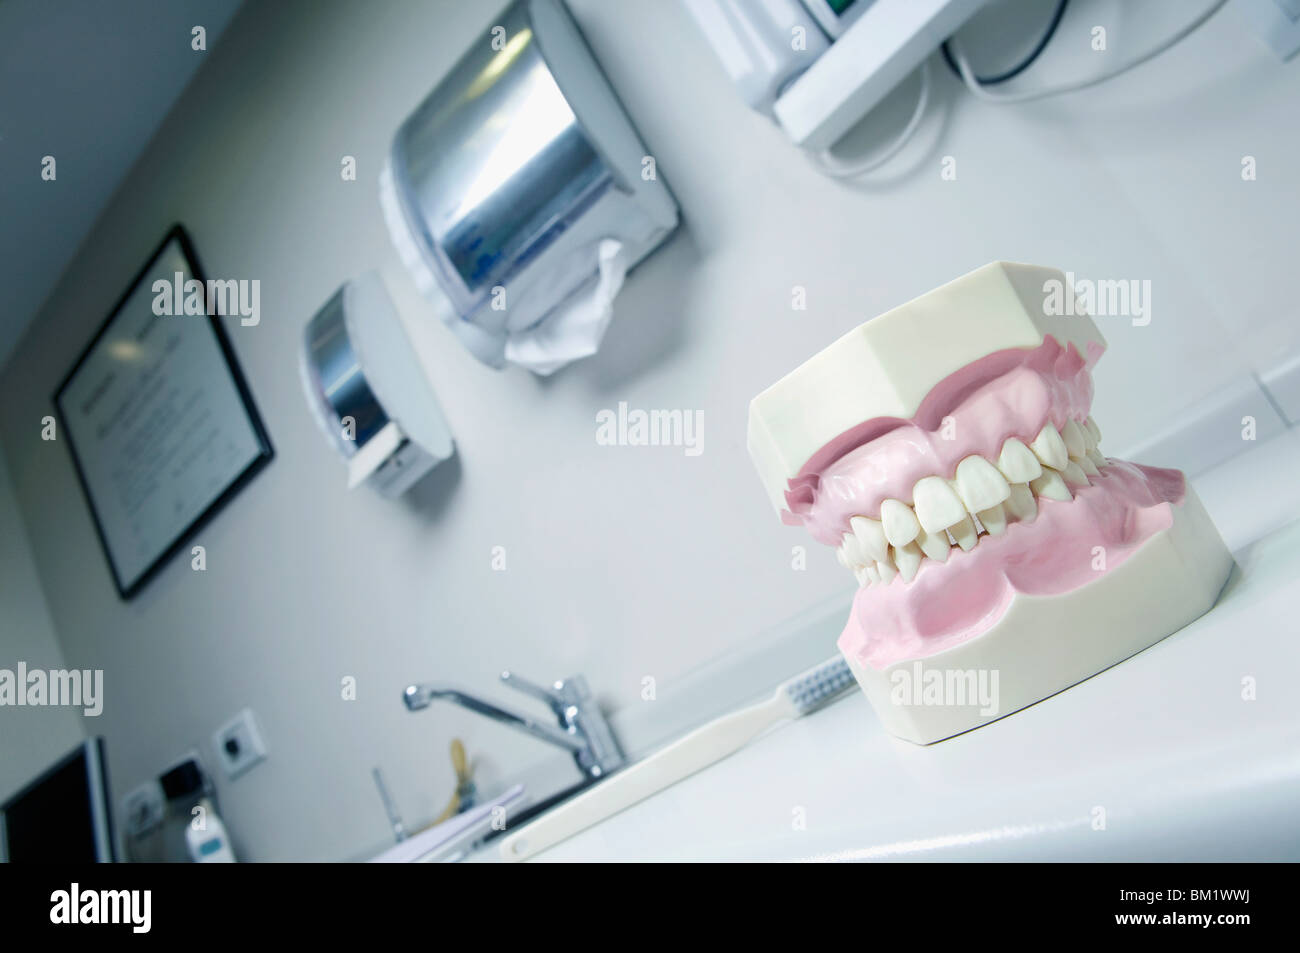 Set of dentures in an examination room Stock Photo